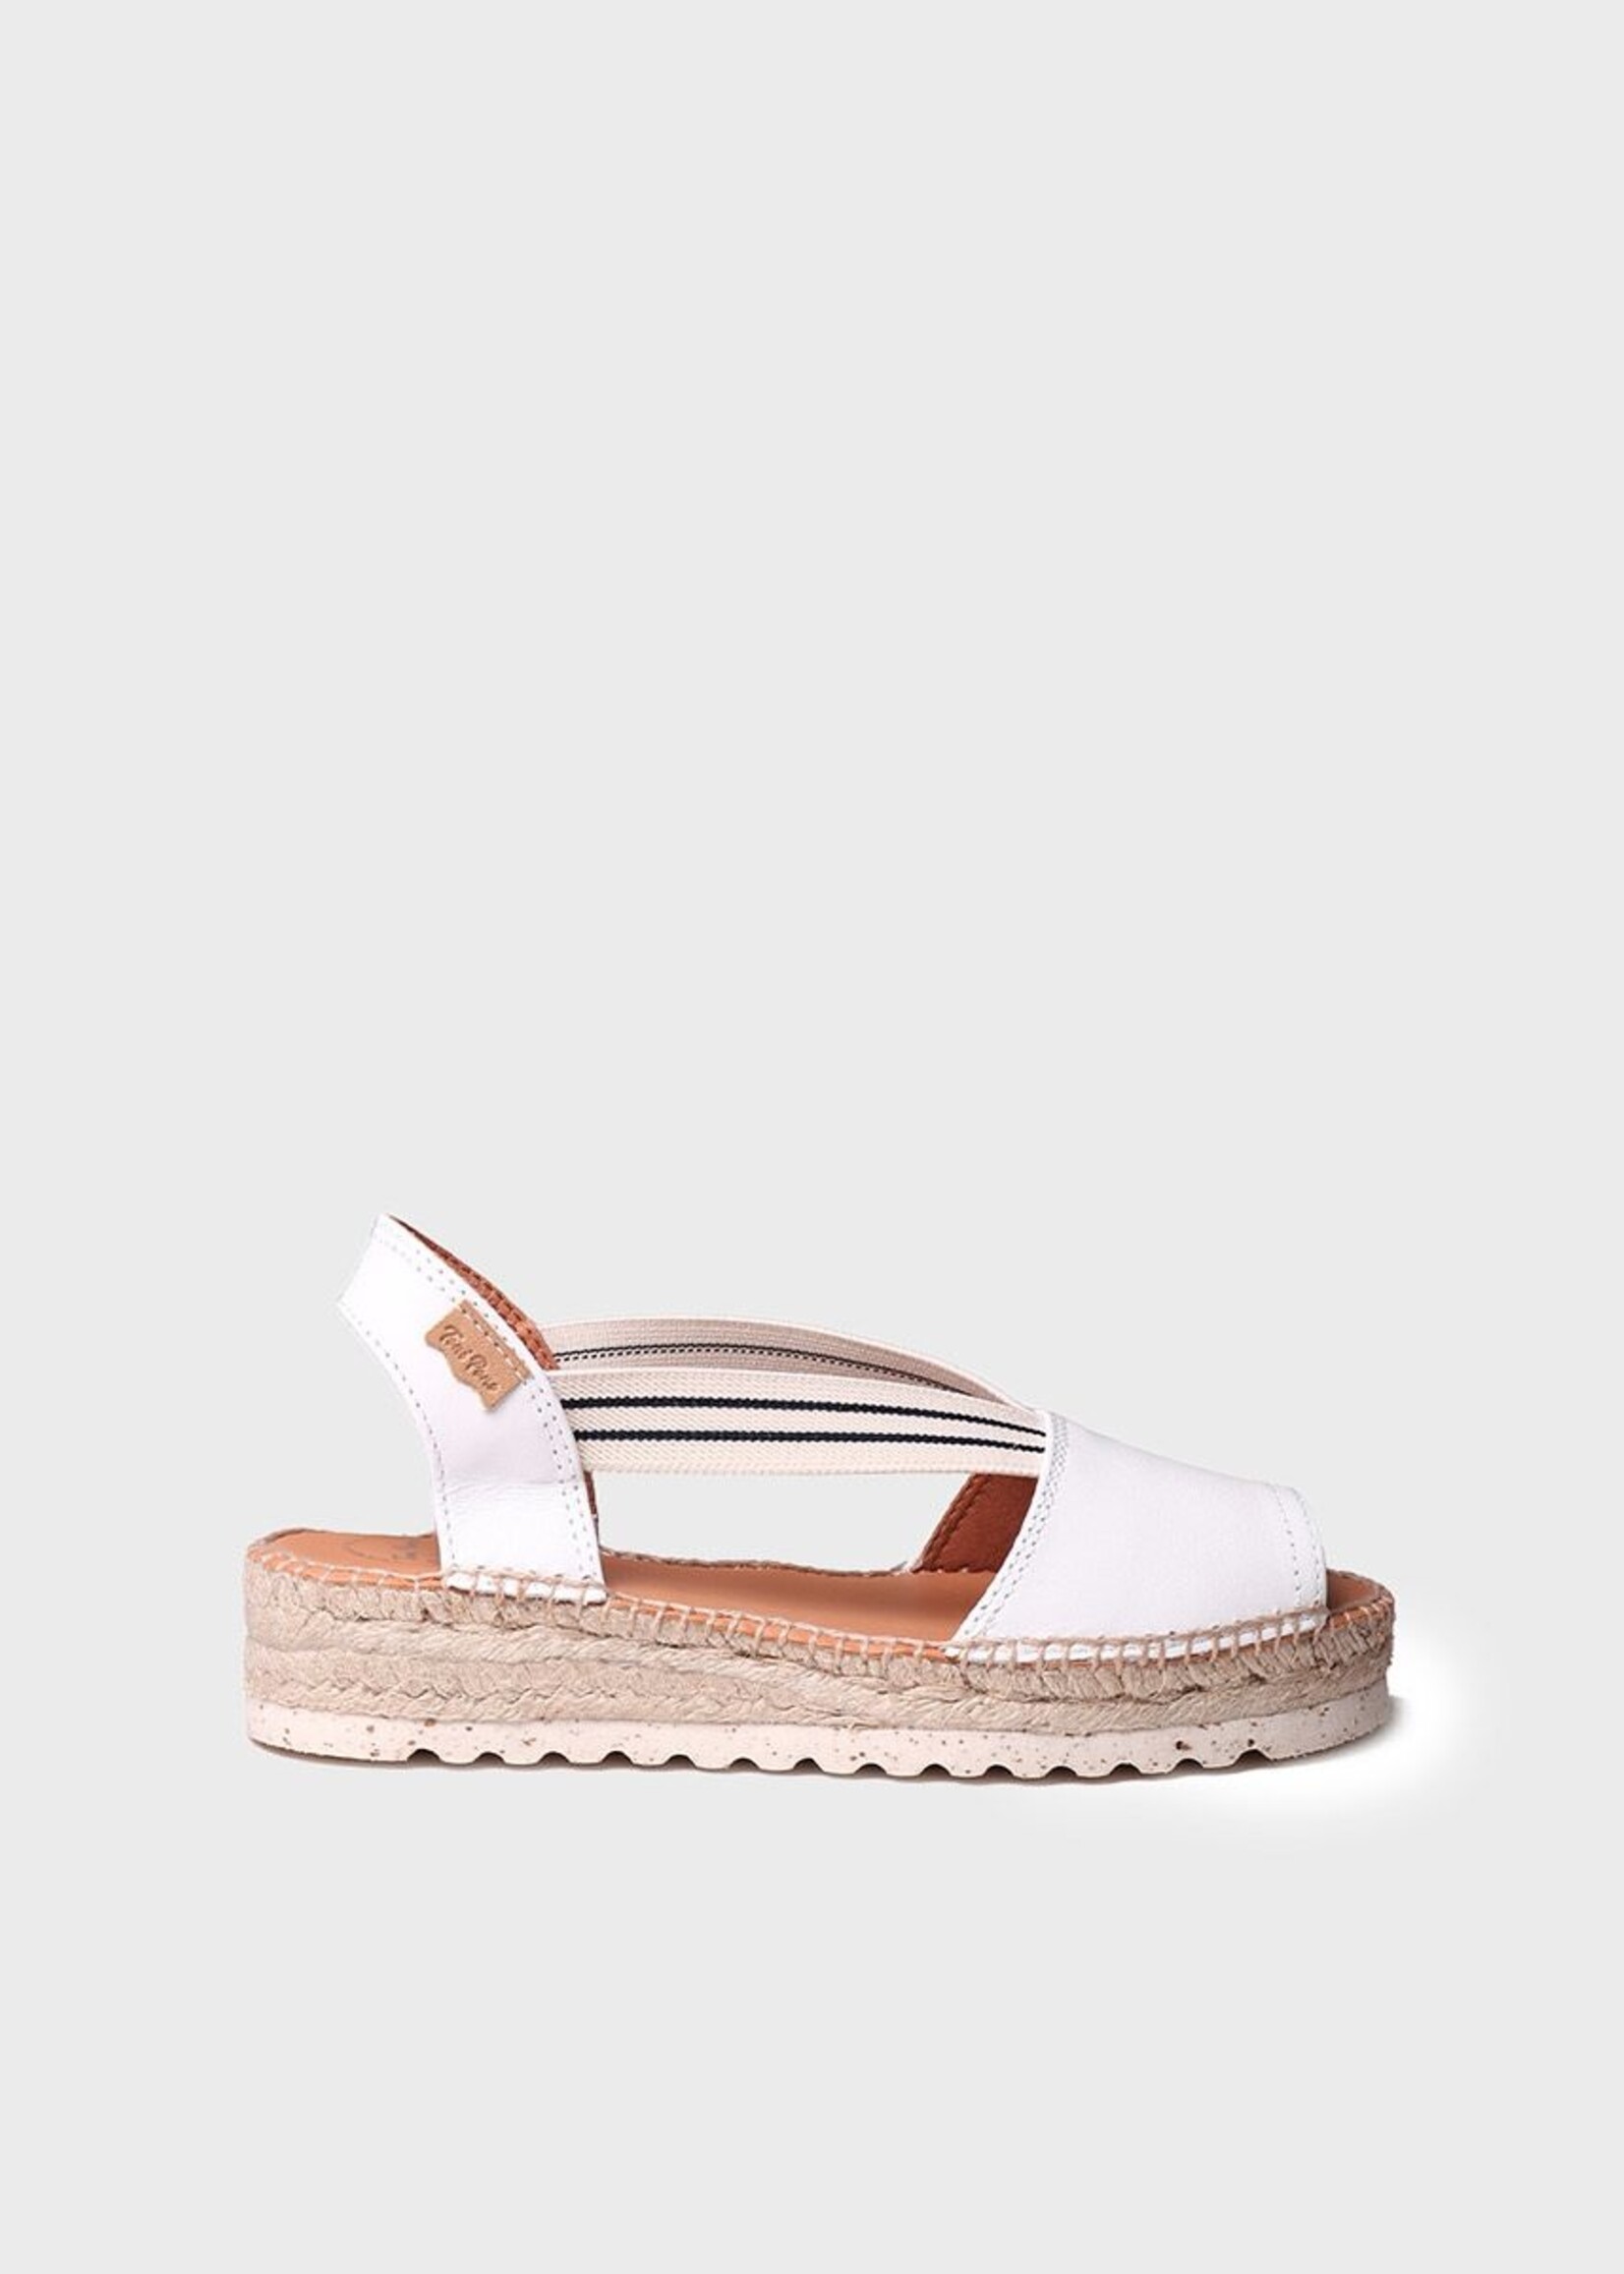 Plateauespadrilles Napa Weiss